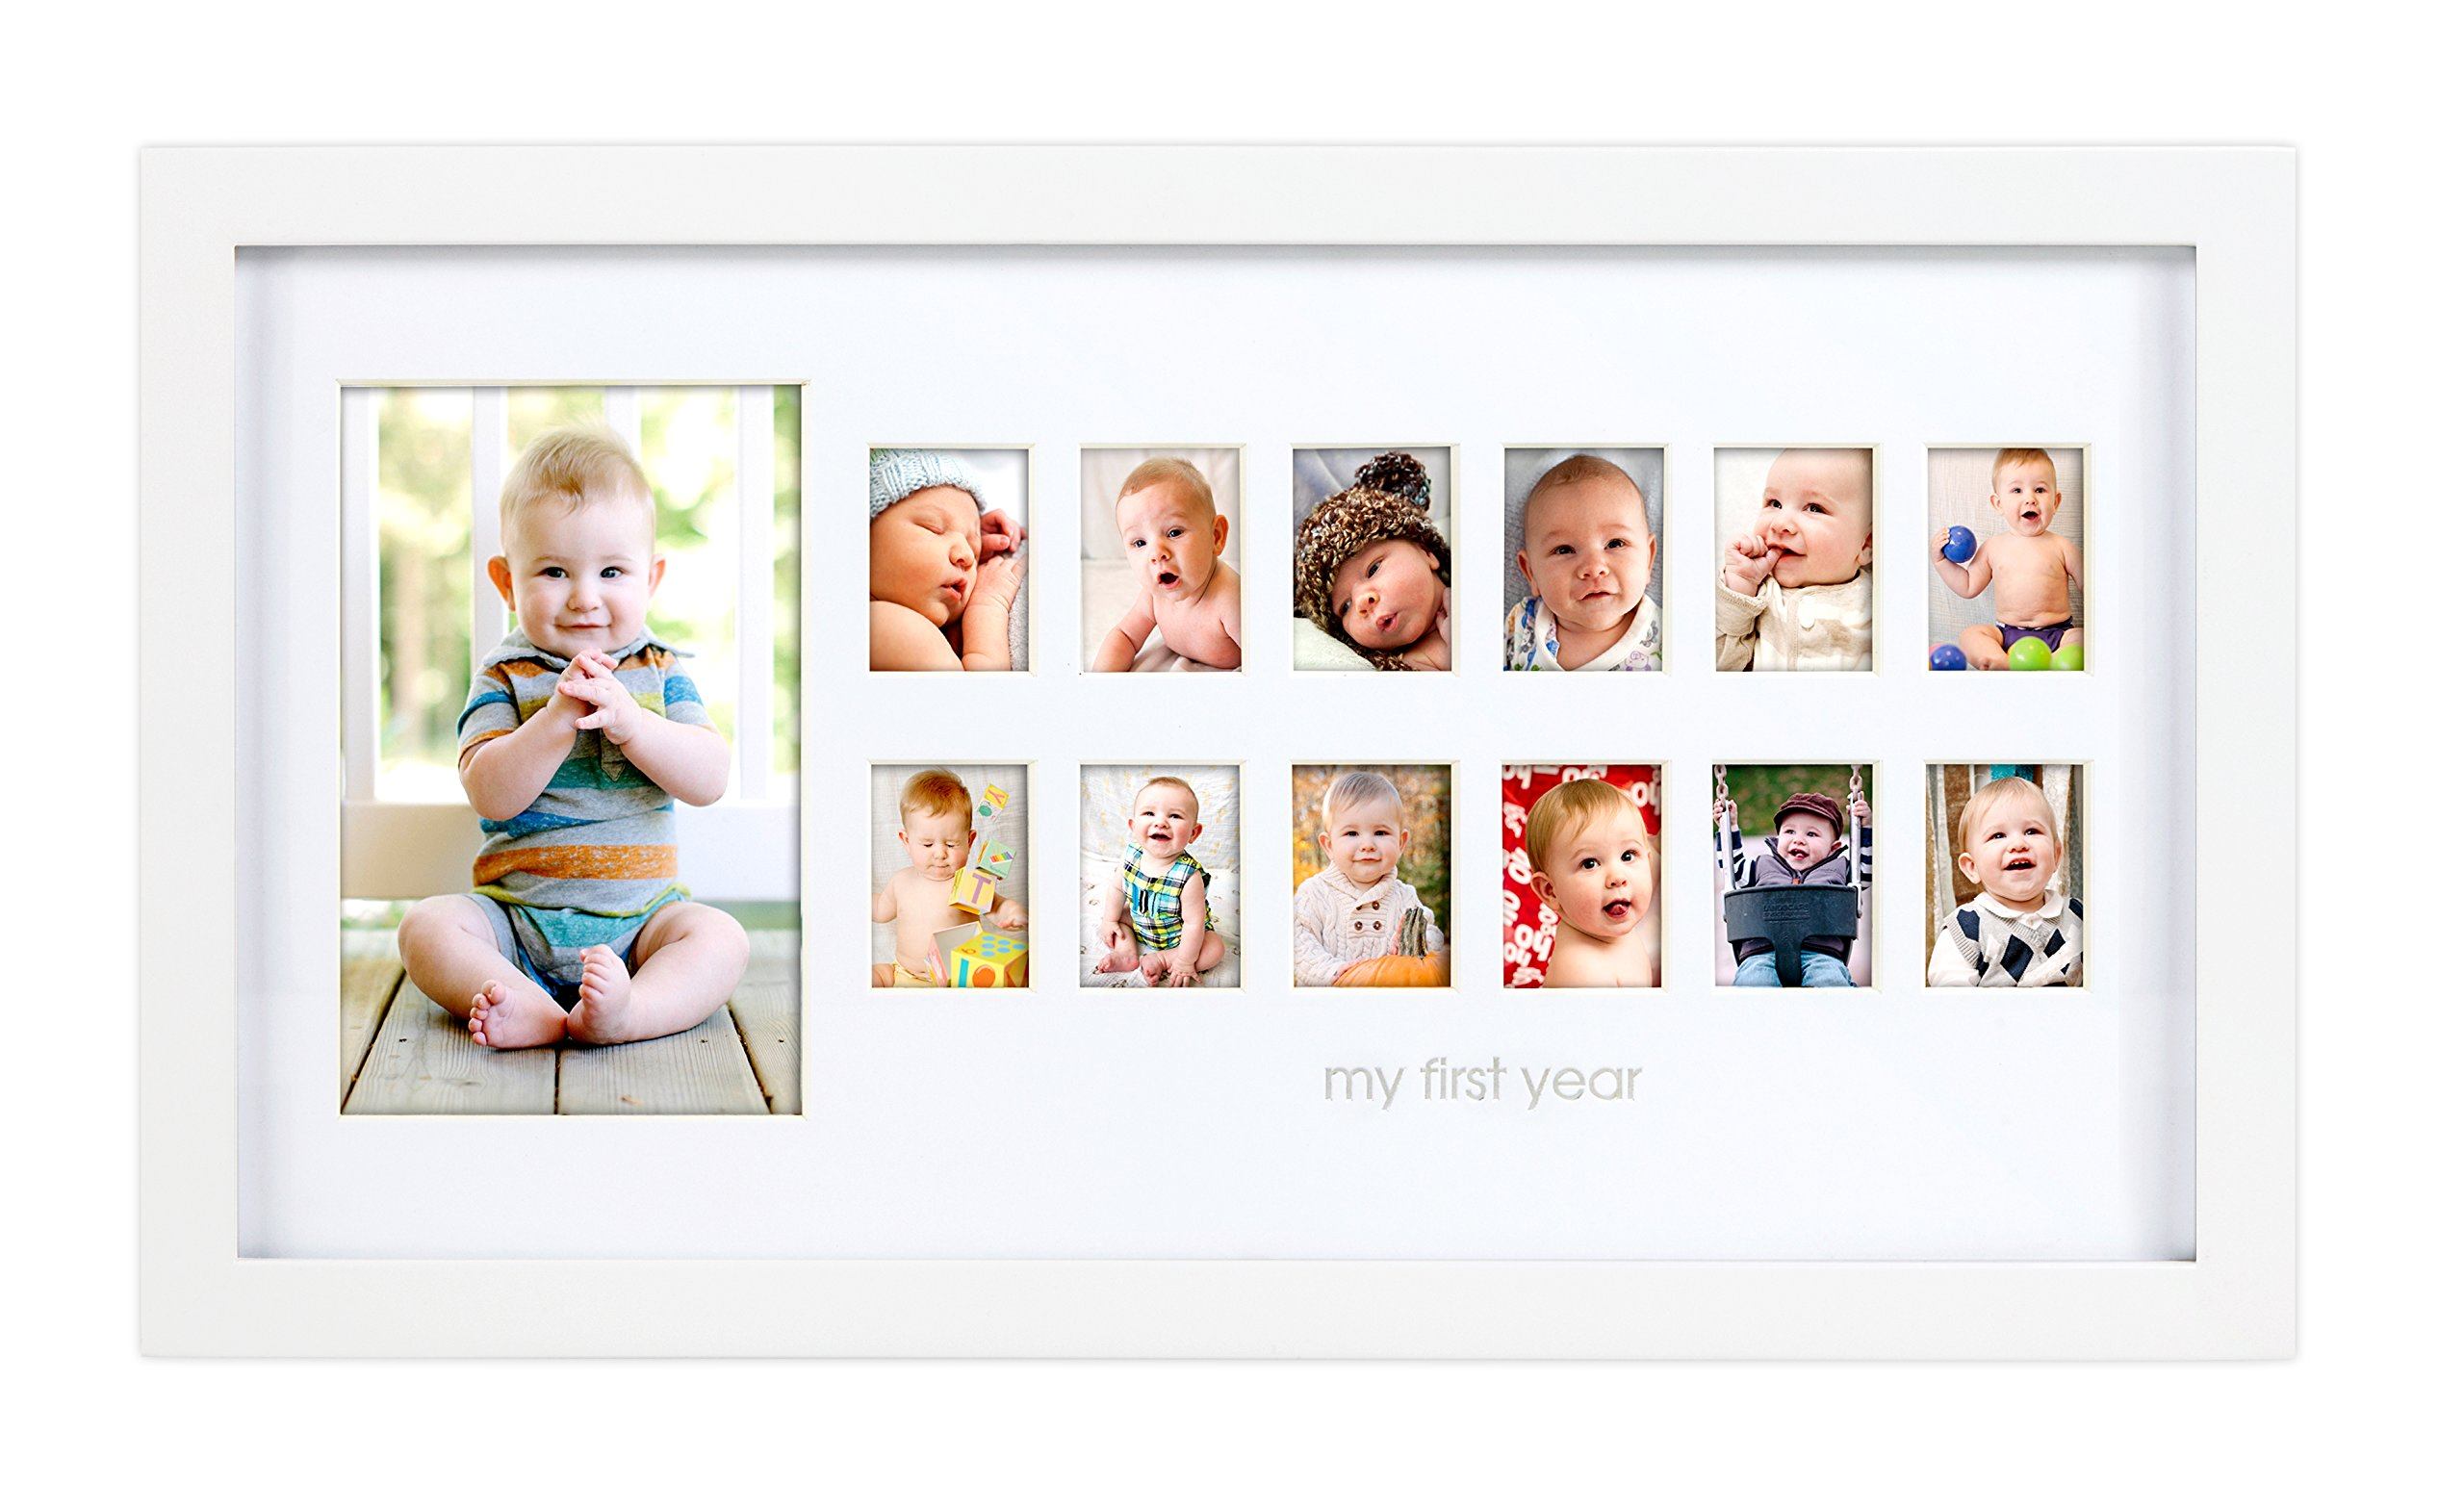 Review: Best Baby First Year Frame for Cherishing Precious Memories